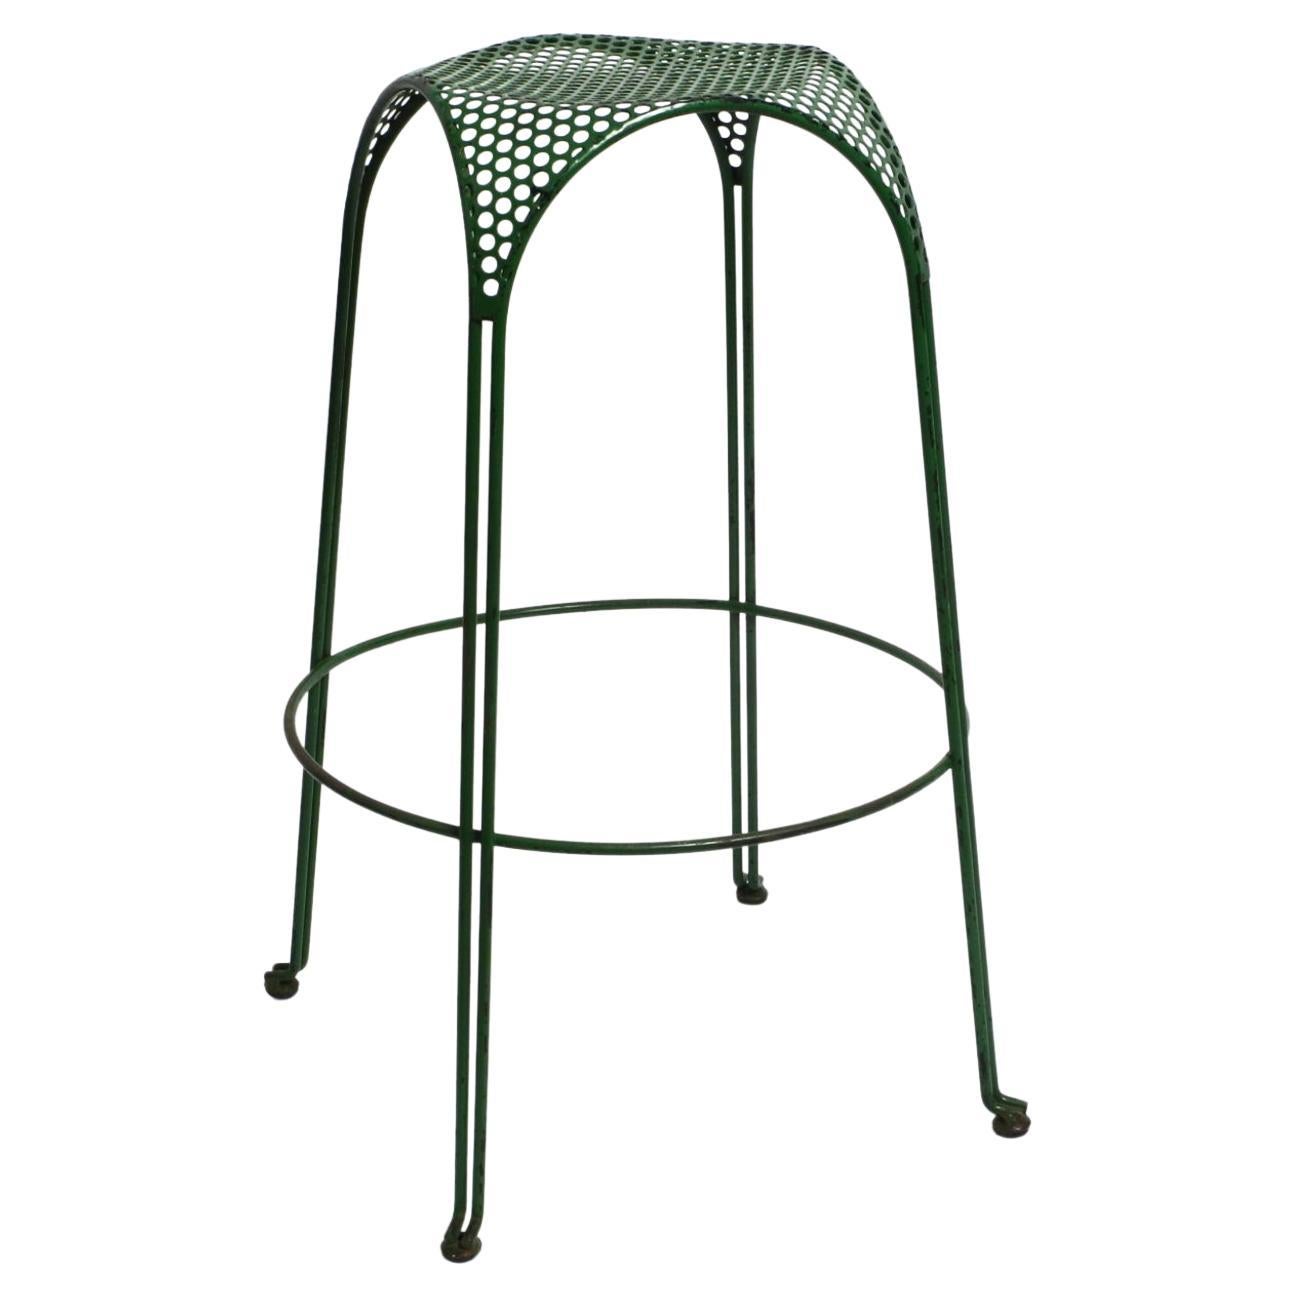 Italian 1960s bar stool made of green painted metal with perforated metal seat